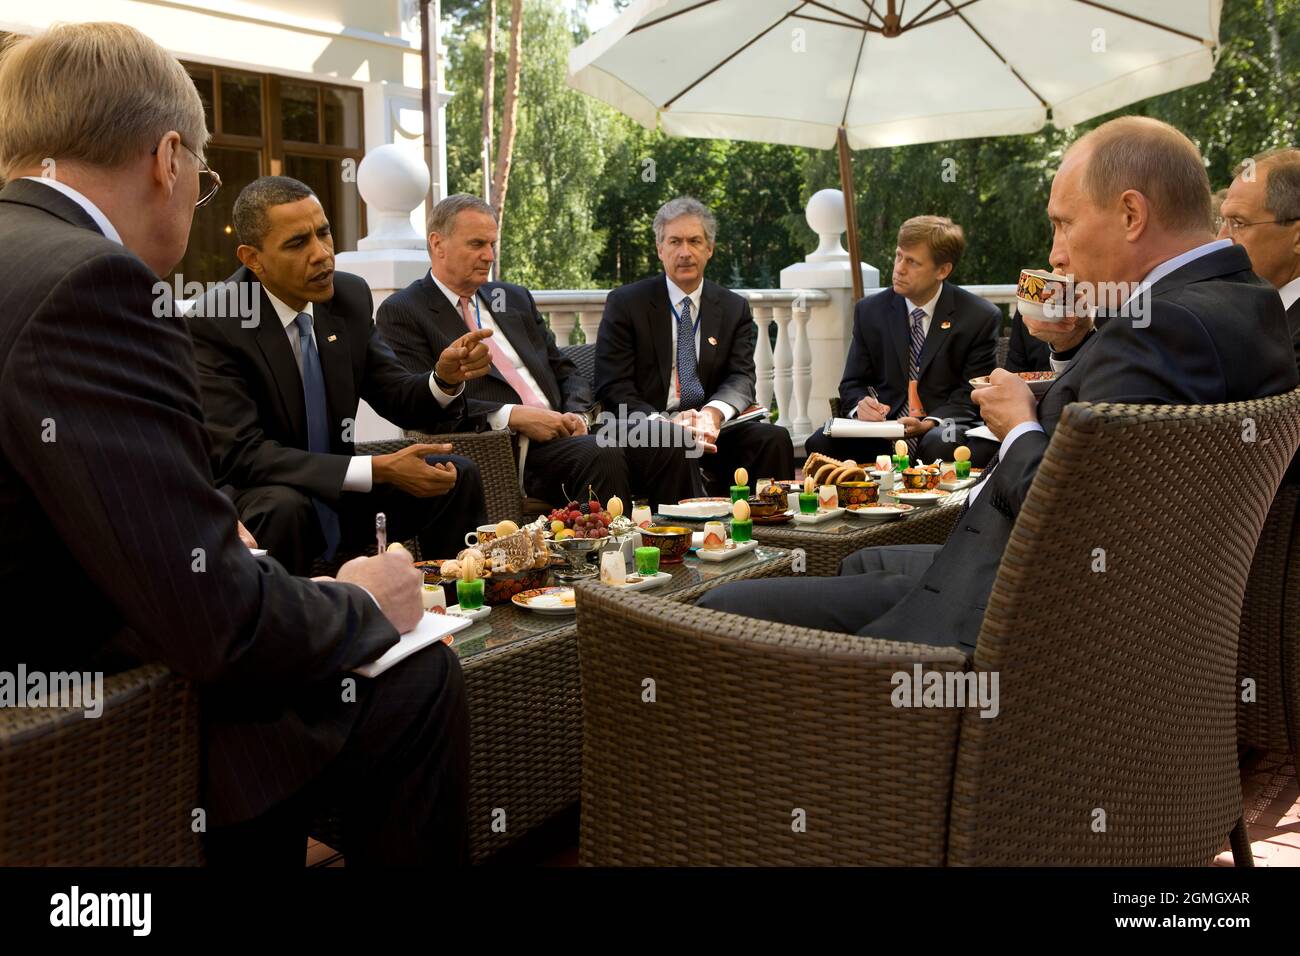 U.S. President Barack Obama and members of the American delegation, National Security Advisor General Jim Jones, Under Secretary for Political Affairs Bill Burns, and NSC Senior Director for Russian Affairs Mike McFaul,  meet with Prime Minister Vladimir Putin at his dacha outside Moscow, July 7, 2009. (Official White House Photo by Pete Souza)   This official White House photograph is being made available for publication by news organizations and/or for personal use printing by the subject(s) of the photograph. The photograph may not be manipulated in any way or used in materials, advertiseme Stock Photo